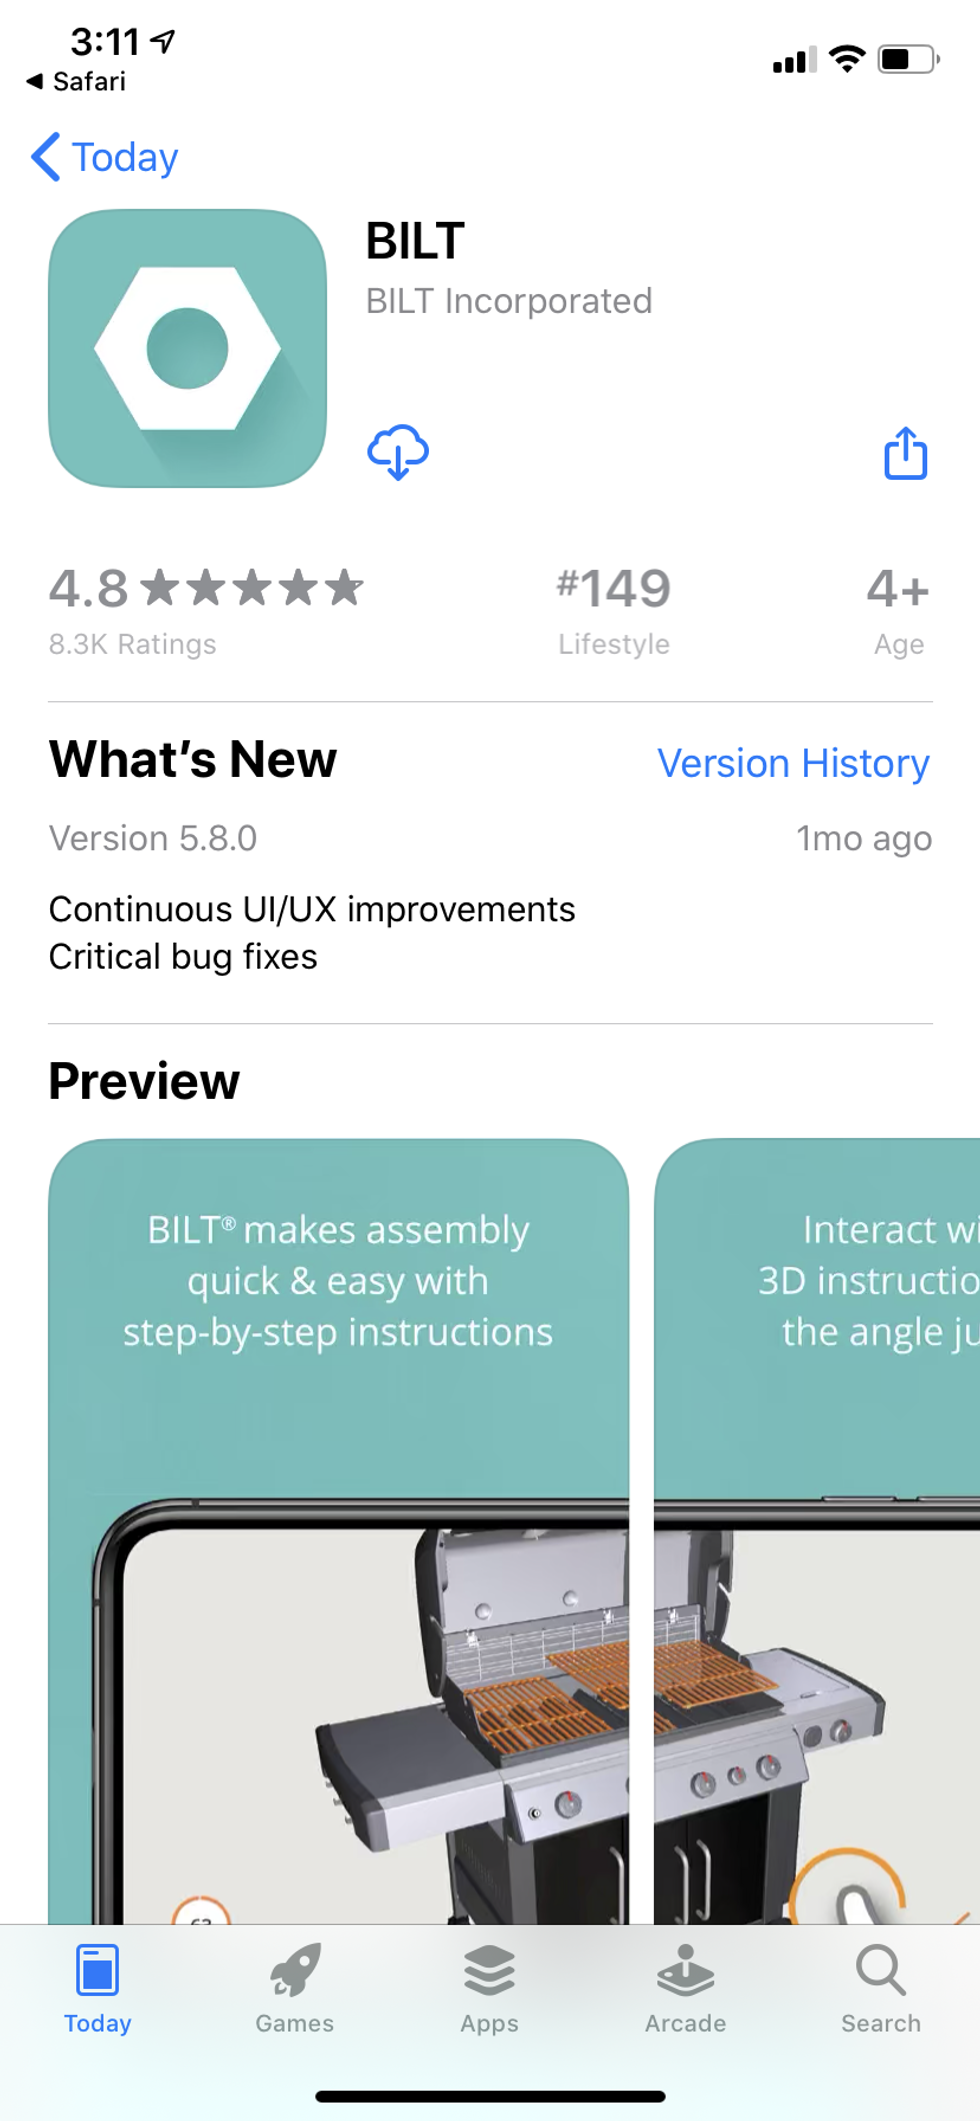 BILT app iin App Store is used to install Lockly Vision